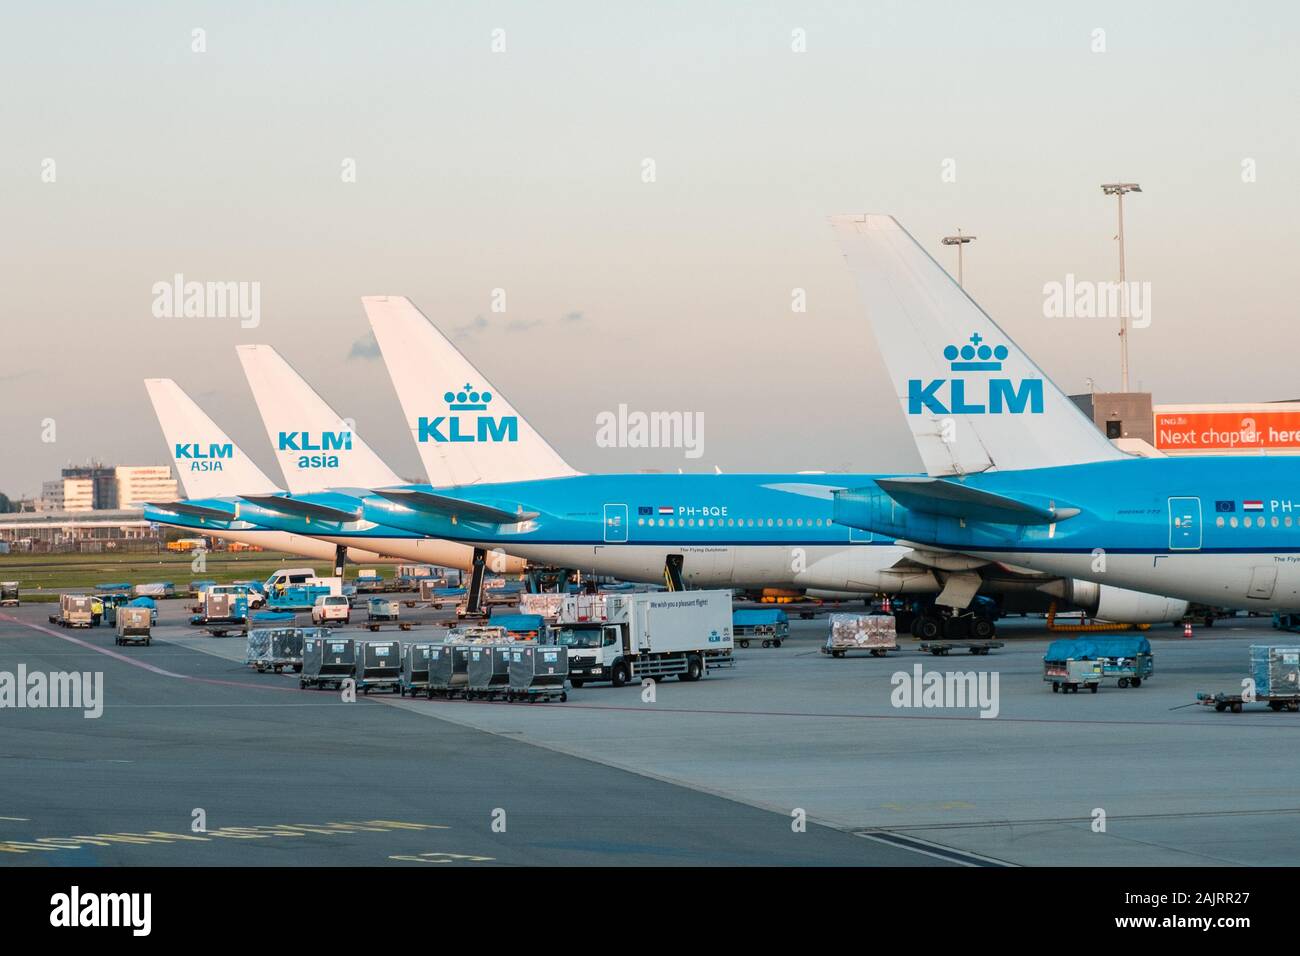 Amsterdam, Netherland - December, 2019: KLM Airline airplanes on airport in Amsterdam Stock Photo